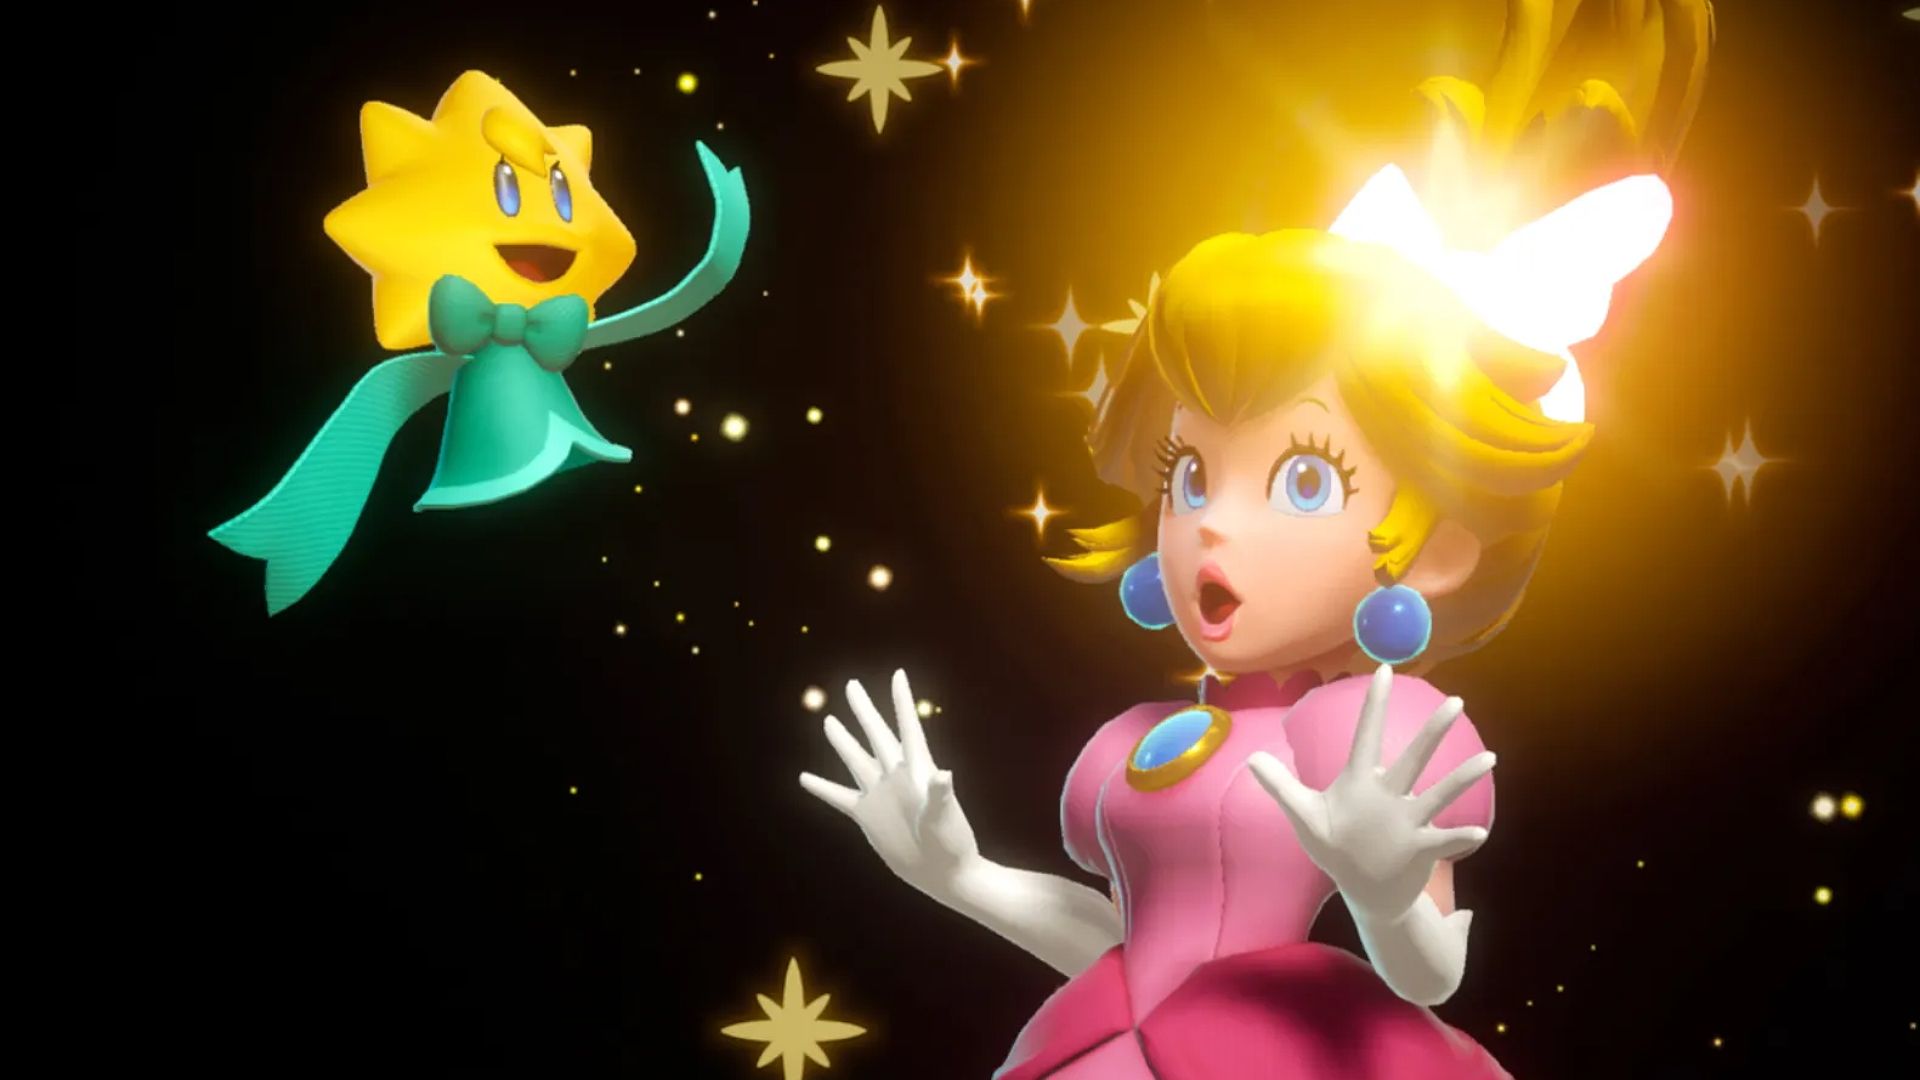 Princess Peach and a floating flower in Princess Peach: Showtime!